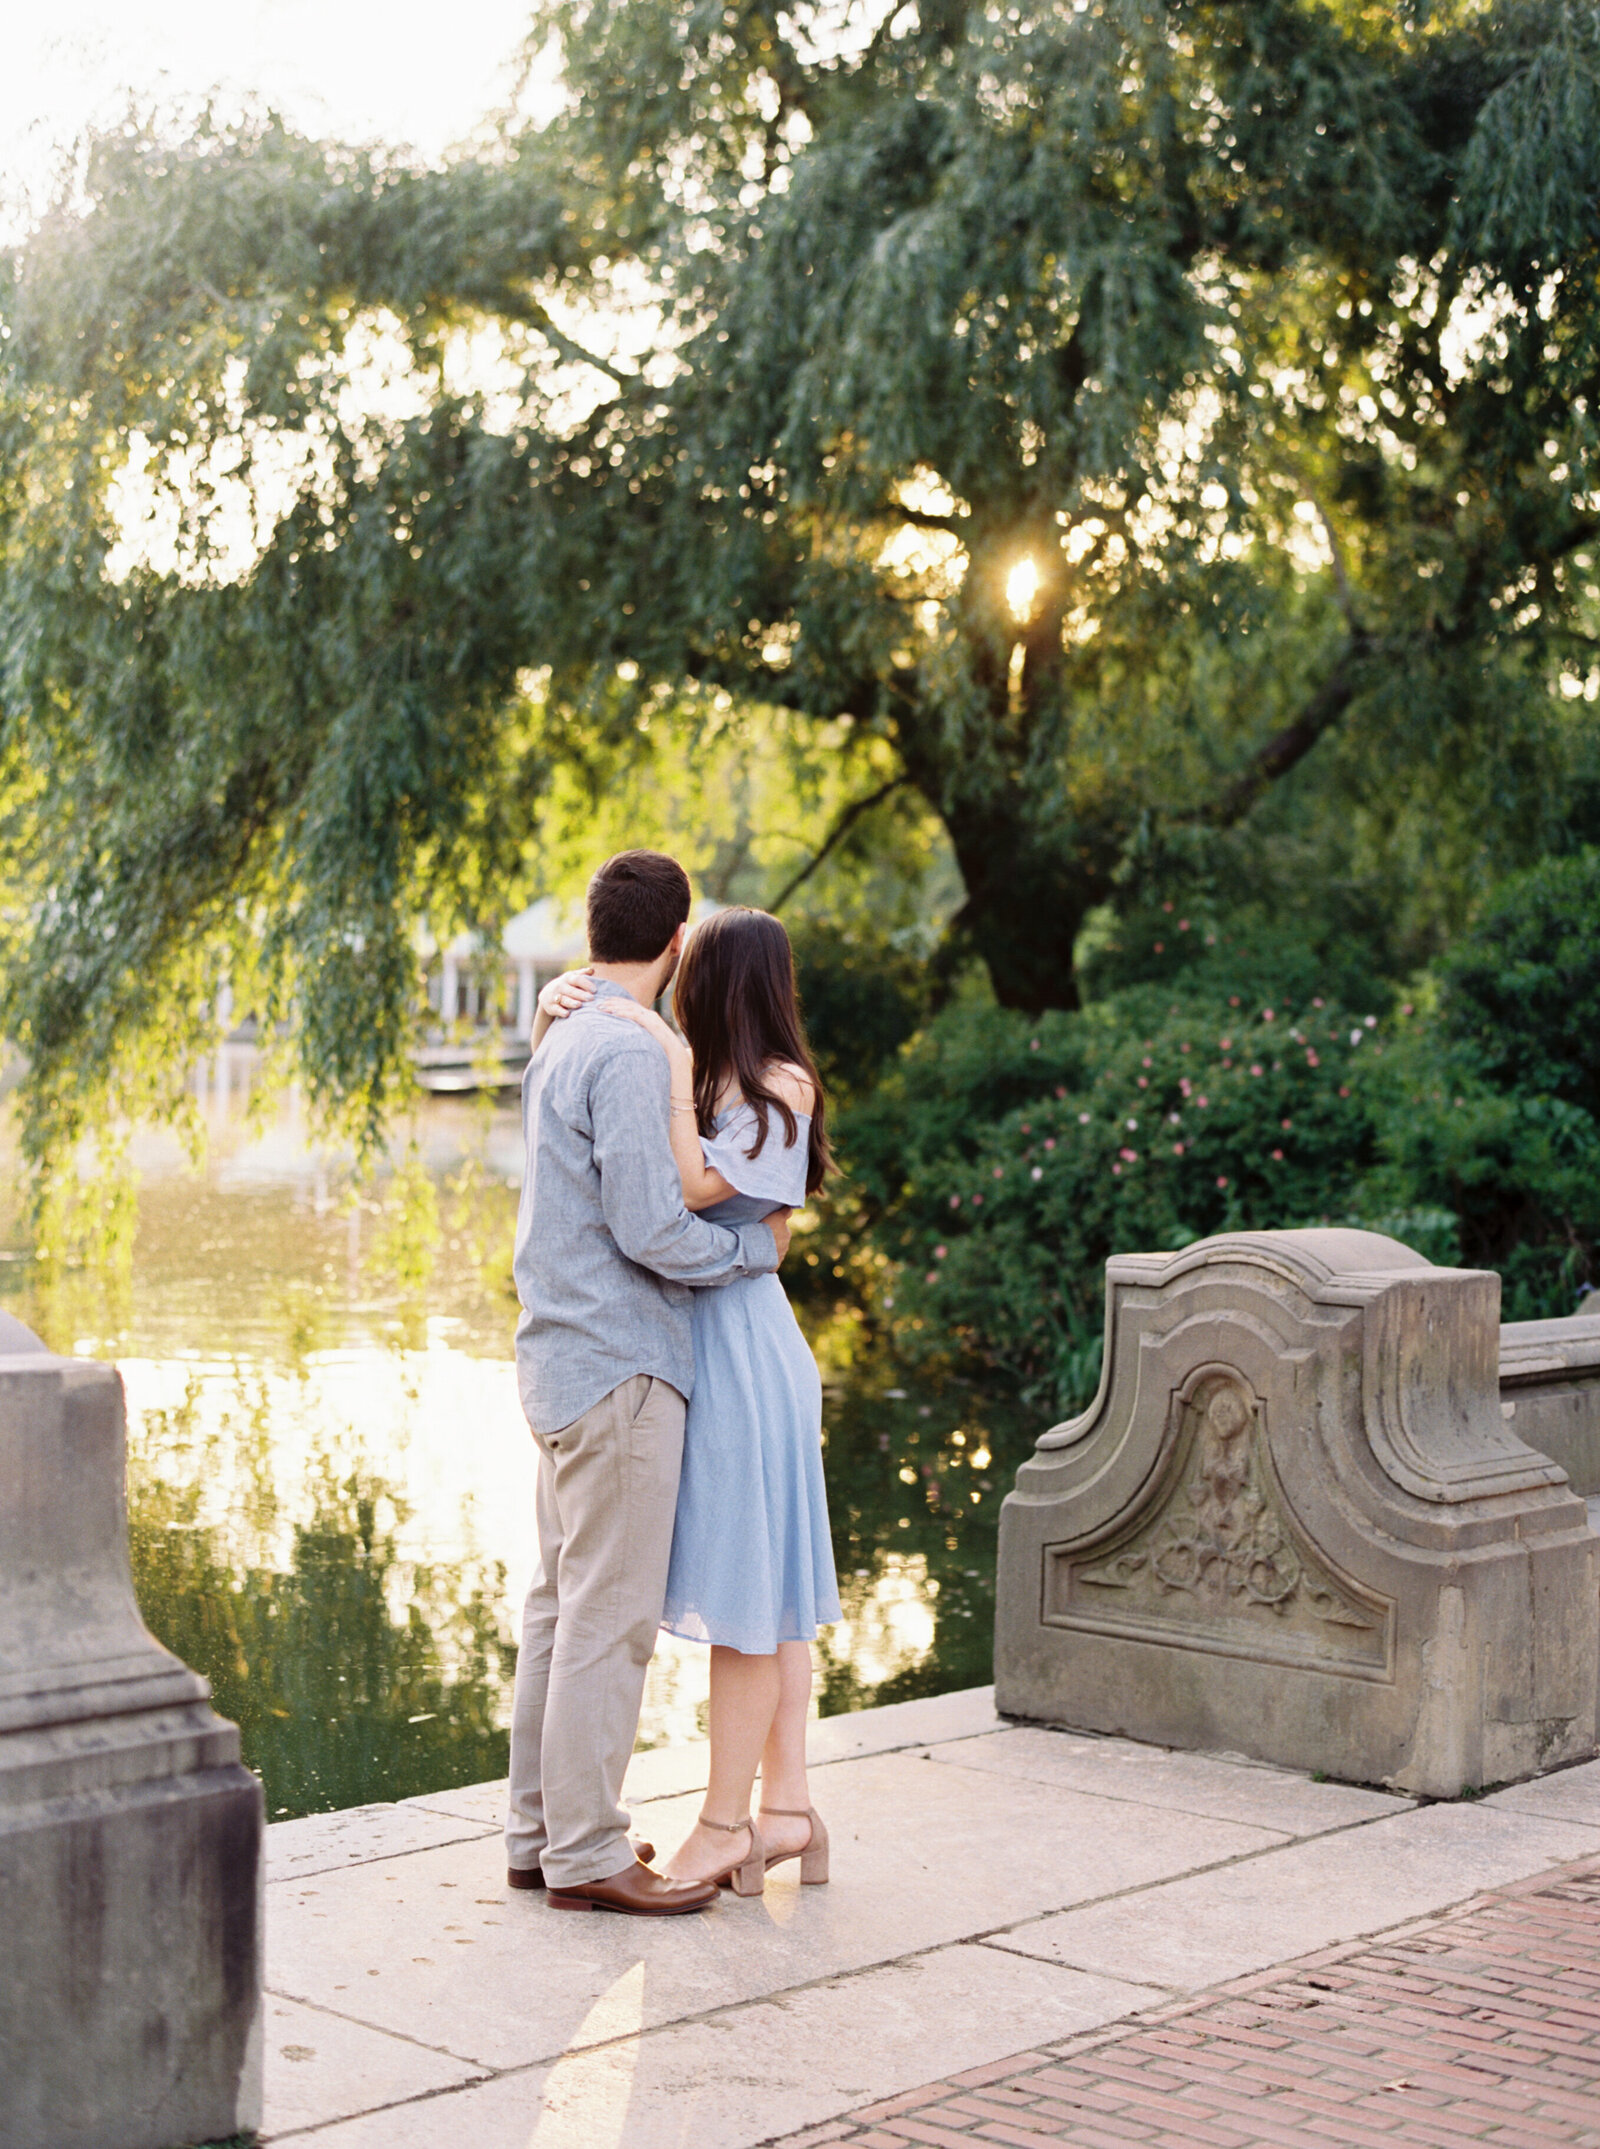 Kaylea Moreno_engagement gallery - Mike-Leia-engagement-session-11